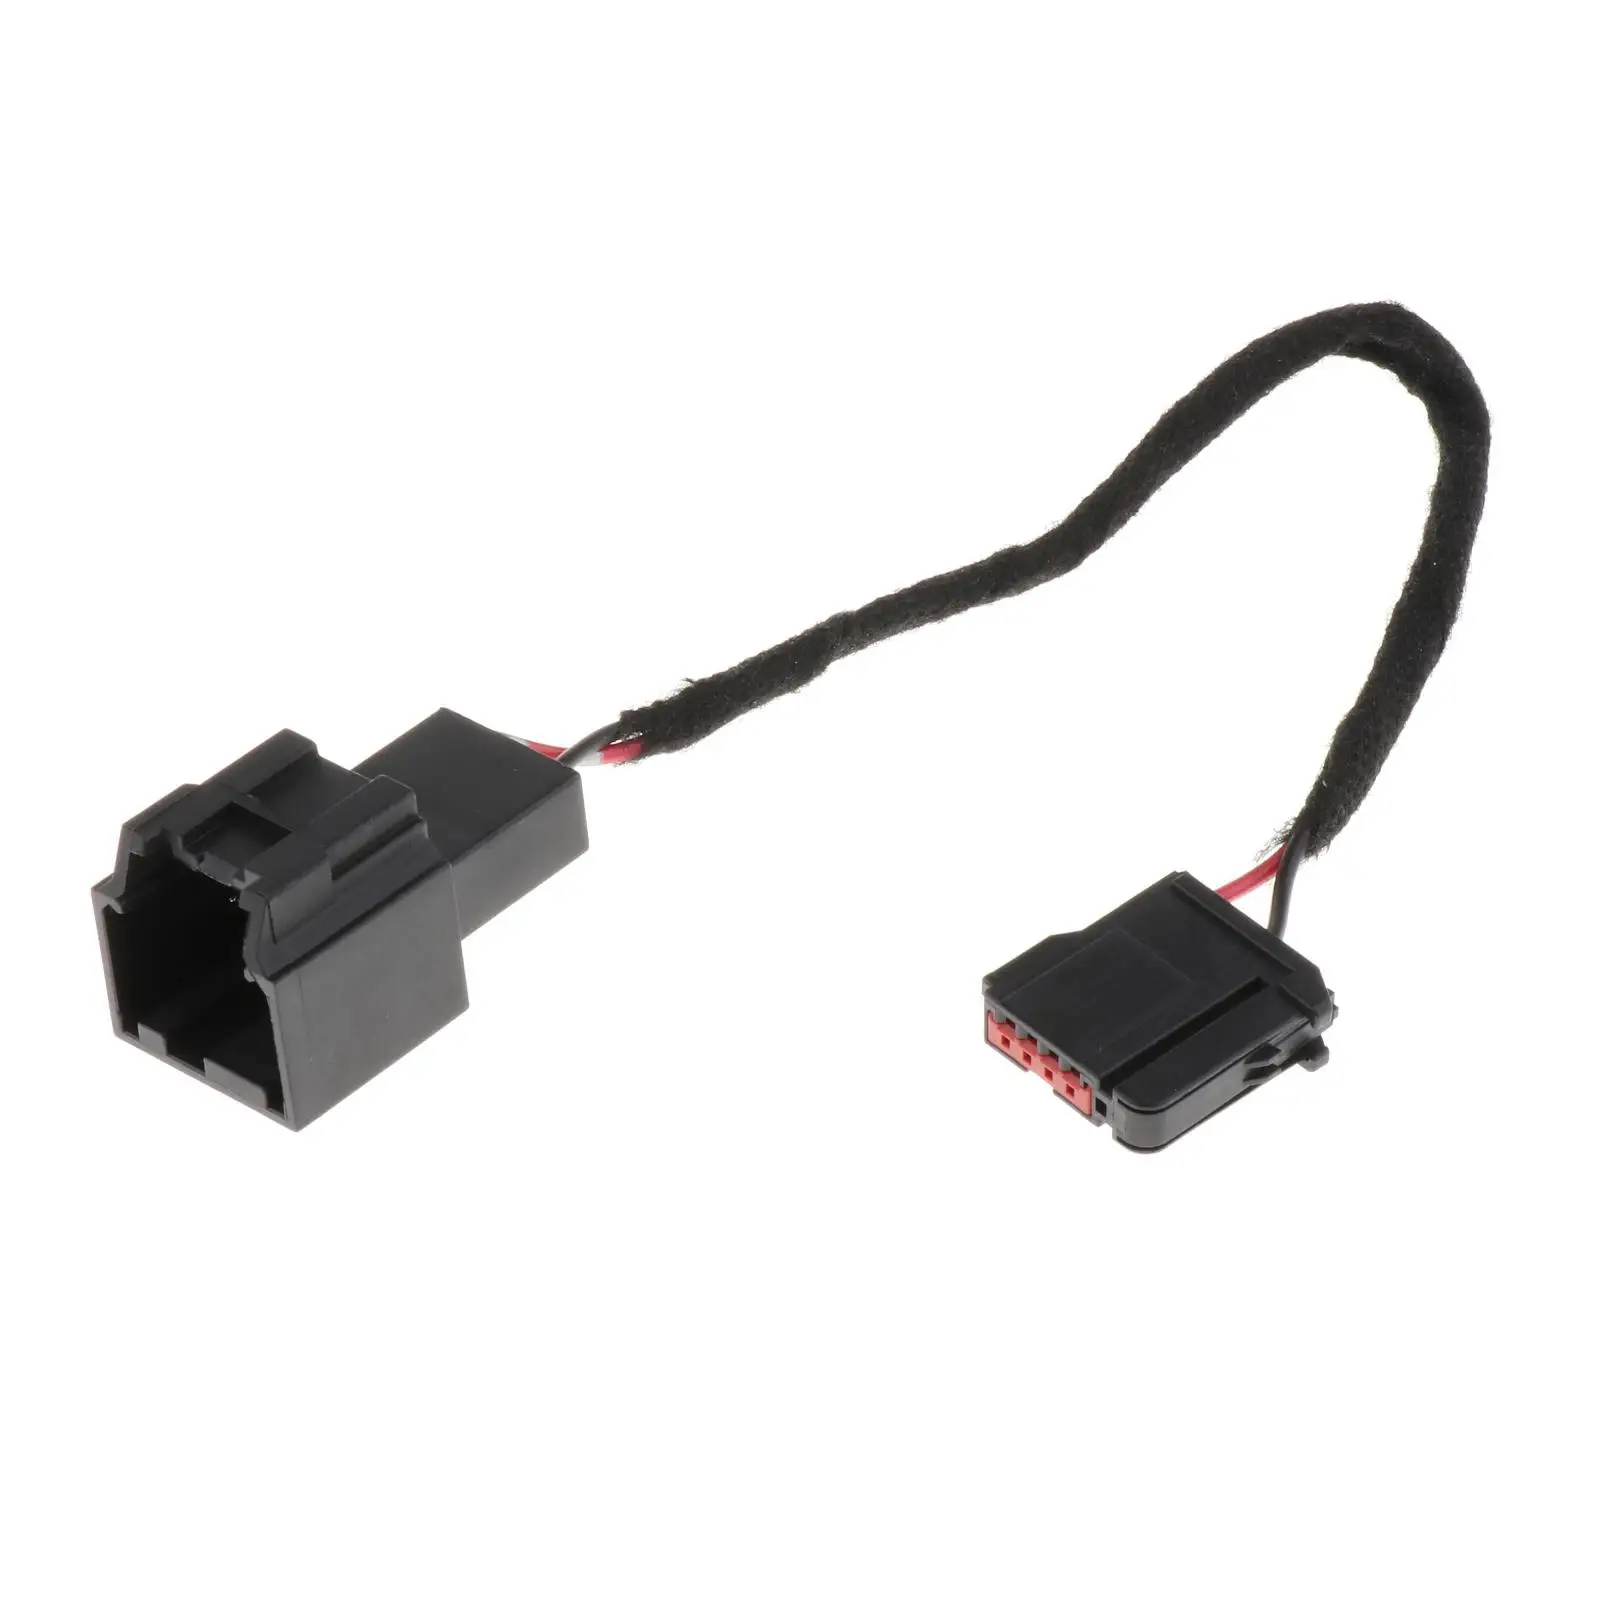 Durable Harness Wiring Adapter for SYNC 2 to SYNC 3 Retrofit USB